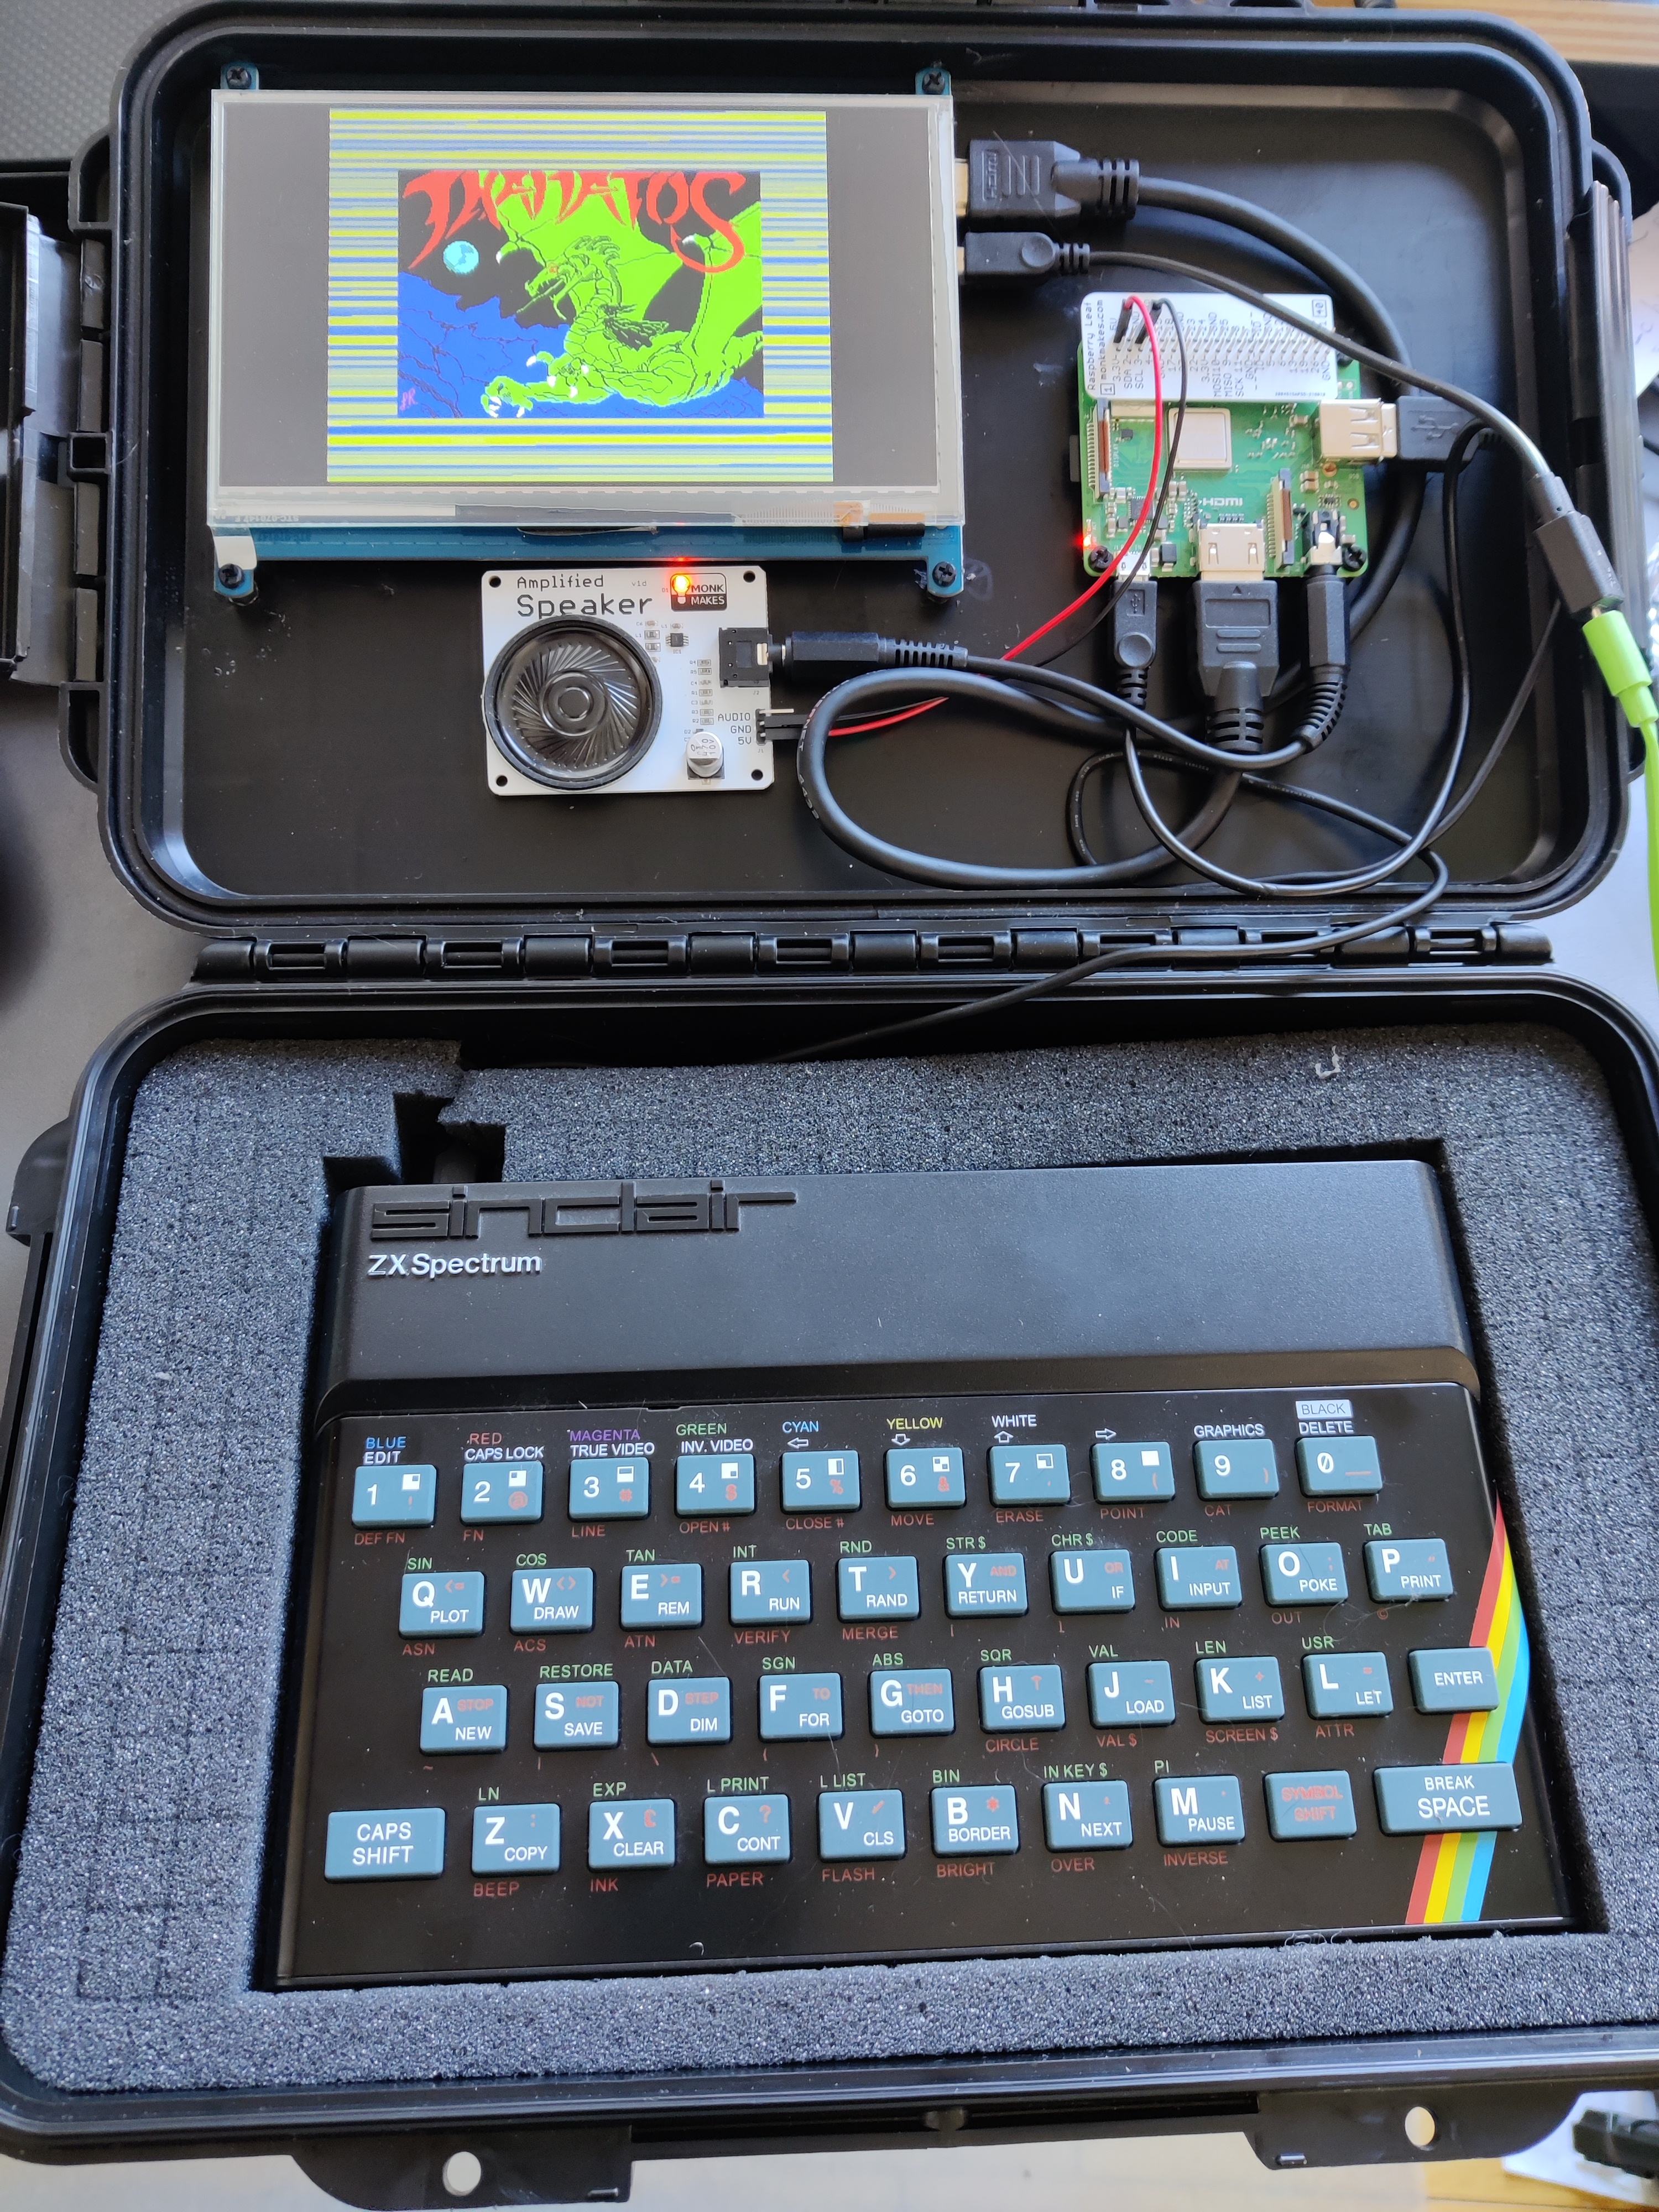 A Spectrum in a self-contained carry case